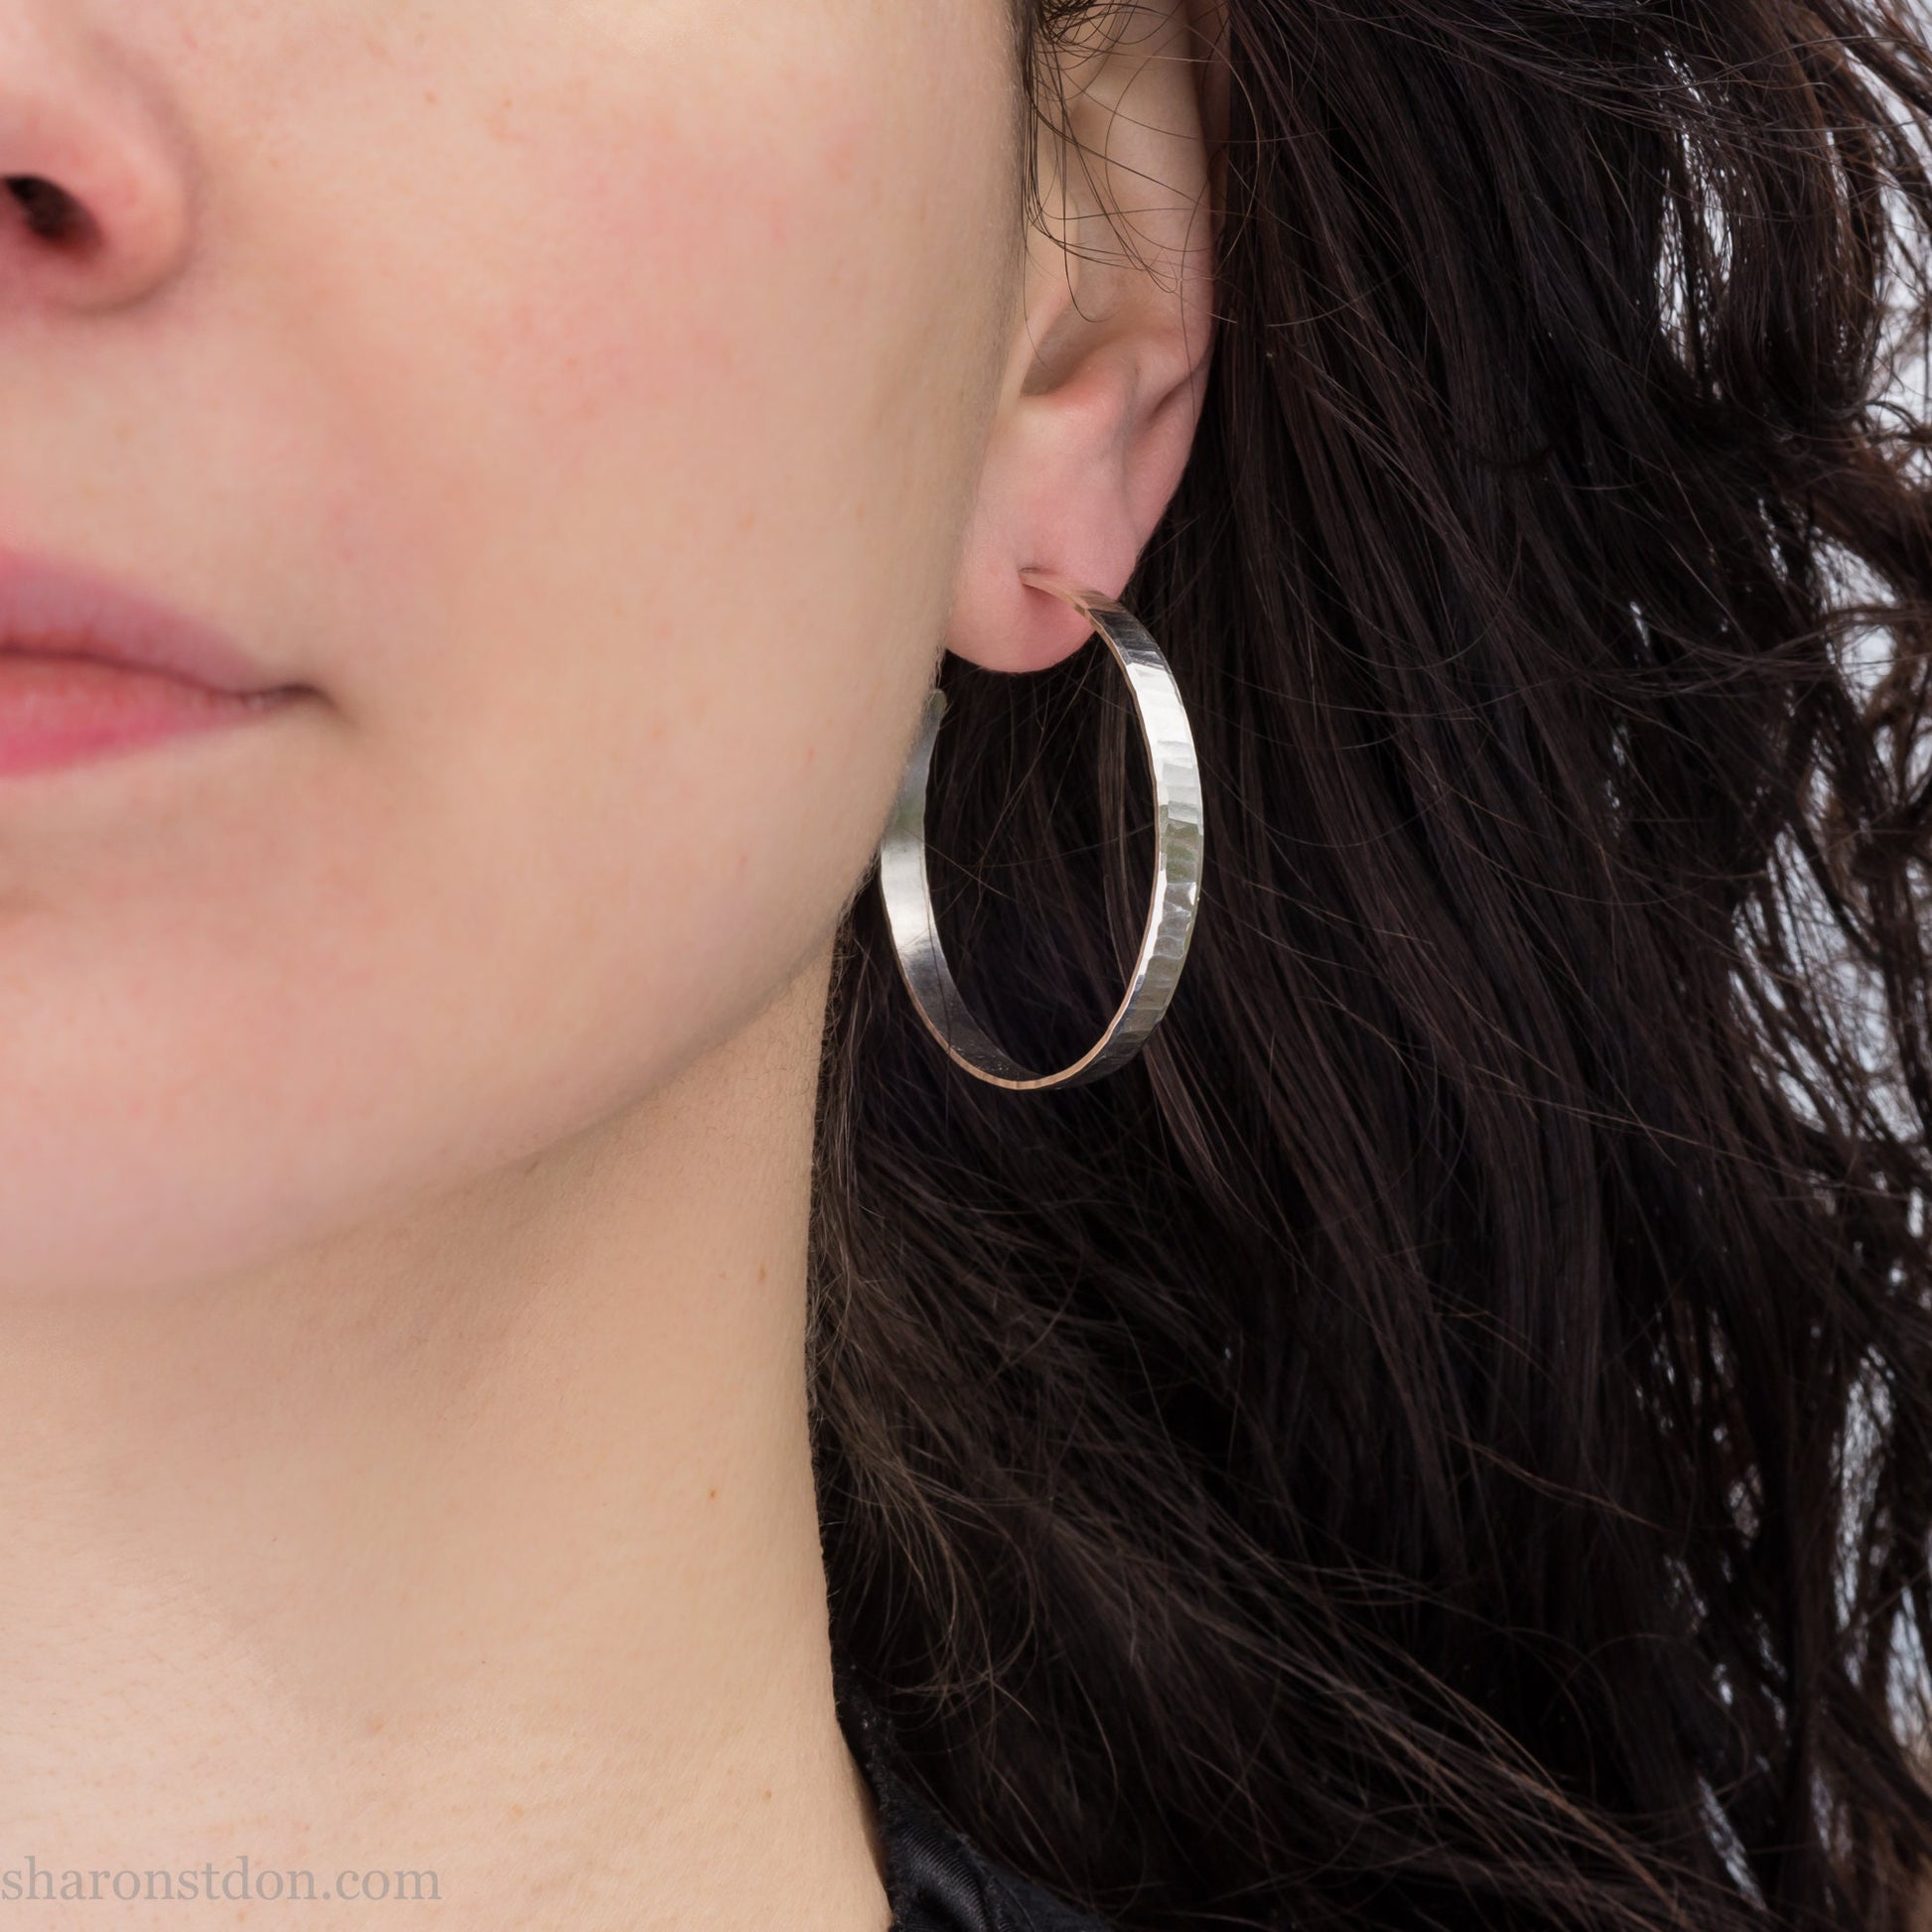 925 handmade sterling silver hoop earrings for women. Comfortable, lightweight, daily wear earrings with a hammered, wavy texture.